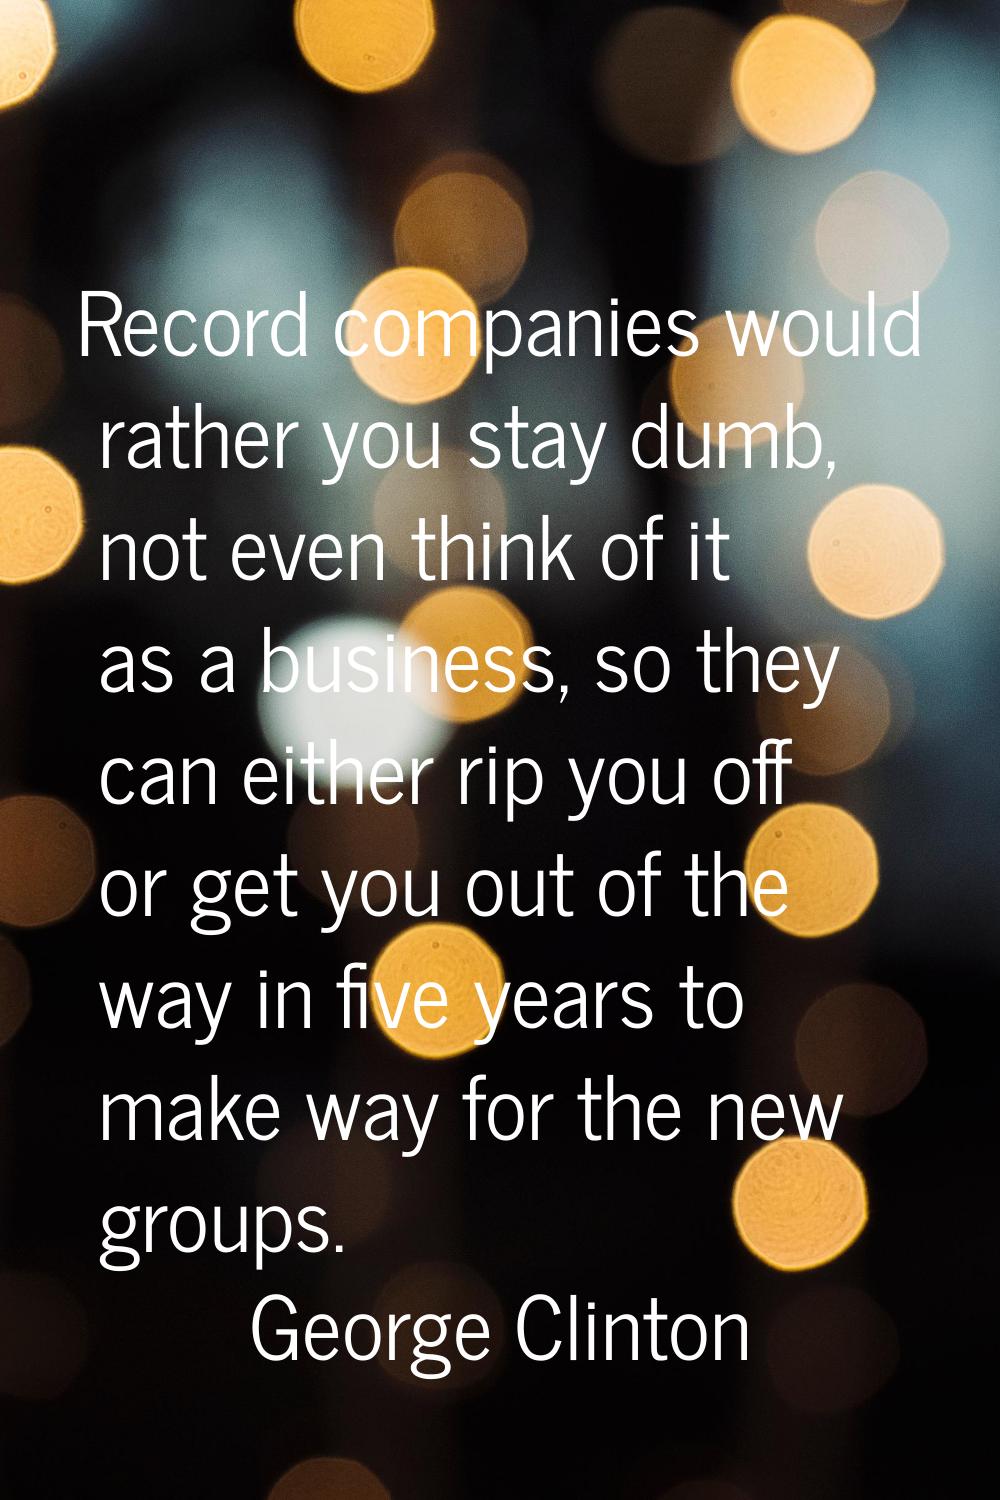 Record companies would rather you stay dumb, not even think of it as a business, so they can either